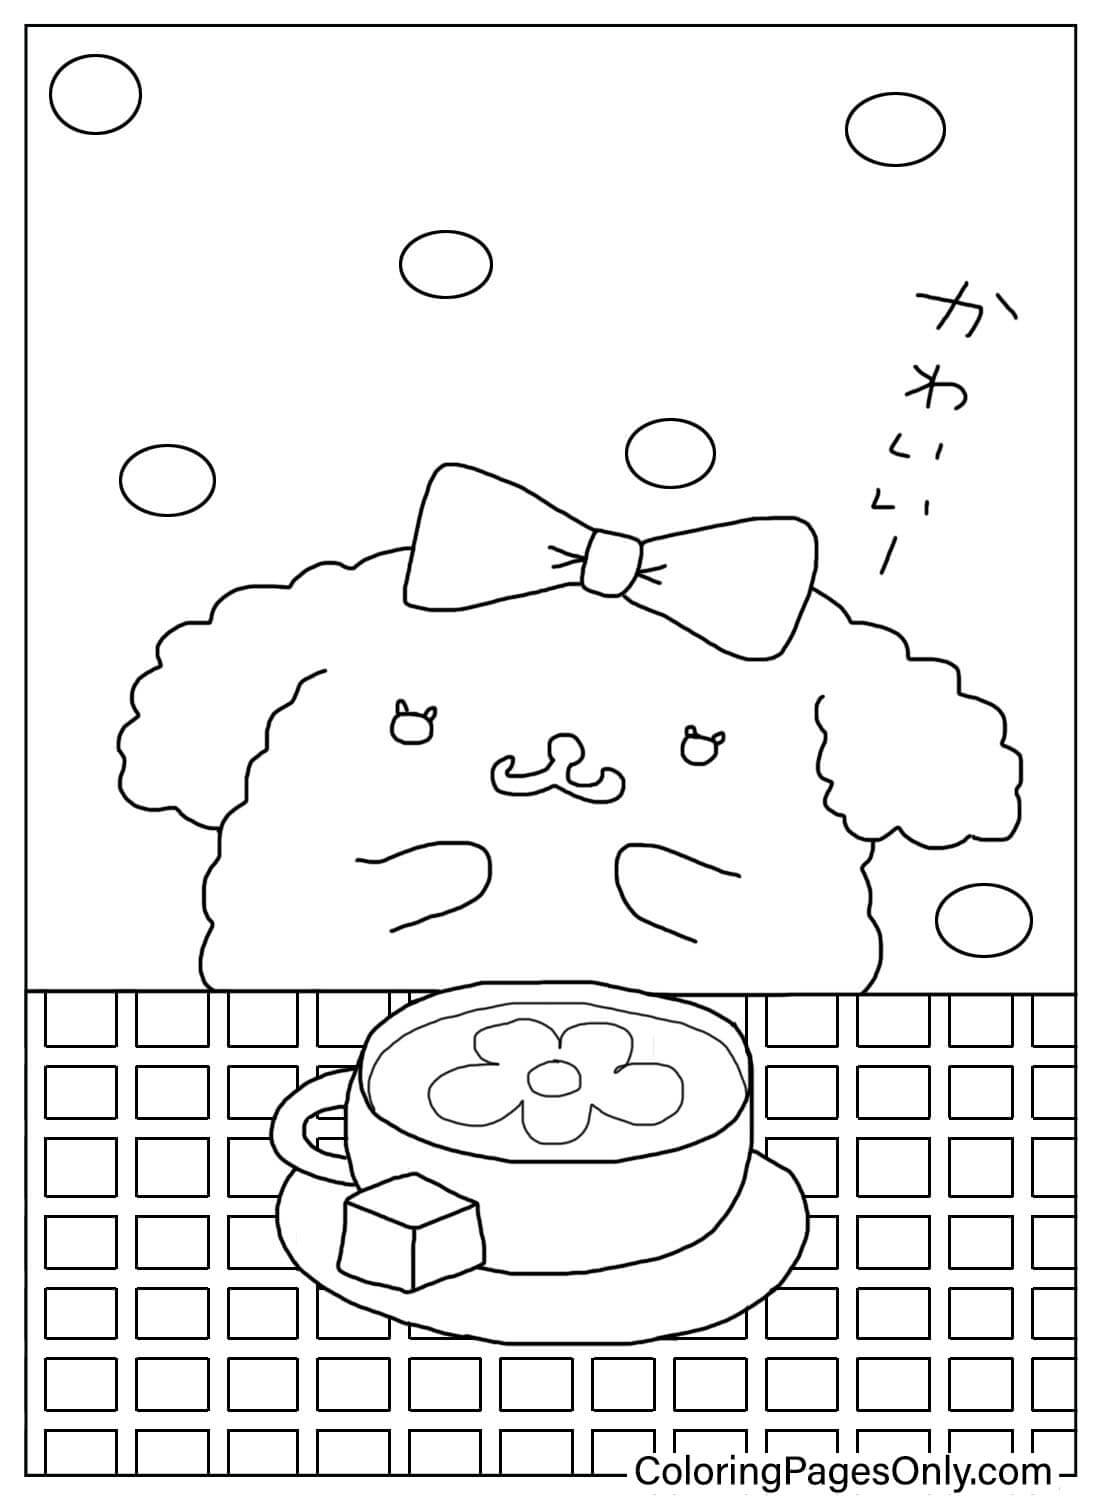 Coloring Page Macaroon Sanrio from Macaroon Sanrio